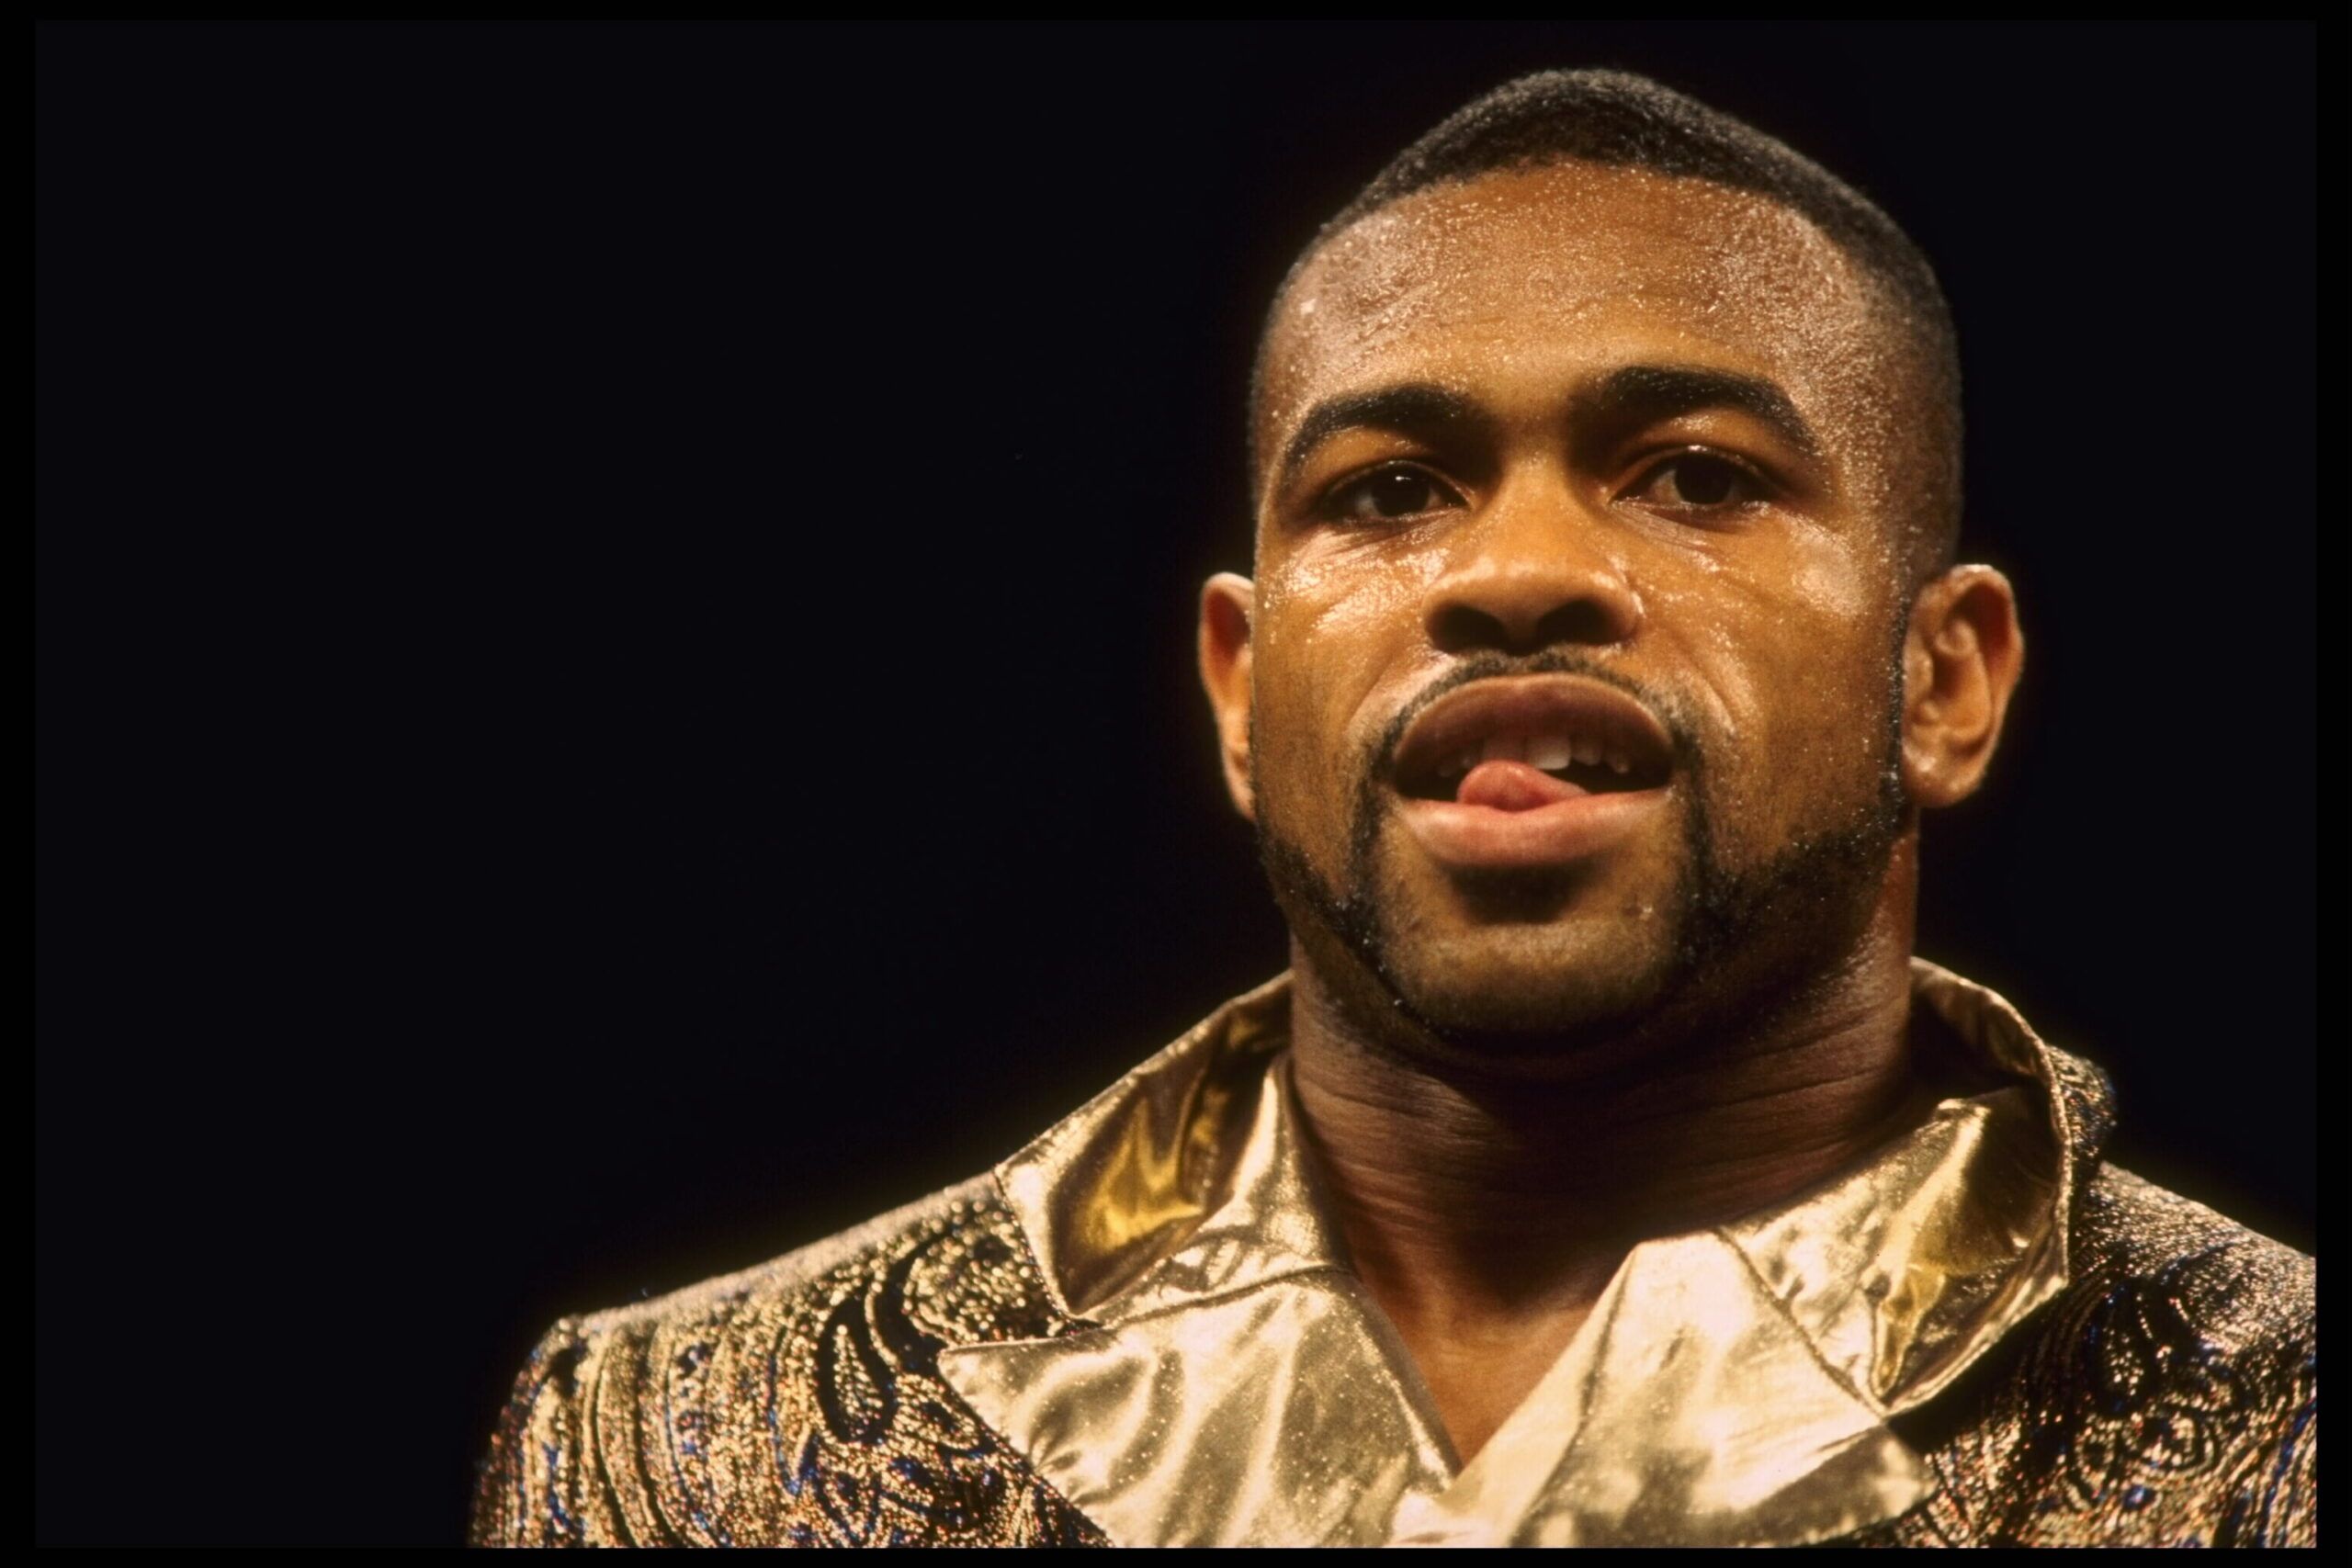 Roy Jones Jr, 53, last fought in an exhibition bout in November 2020